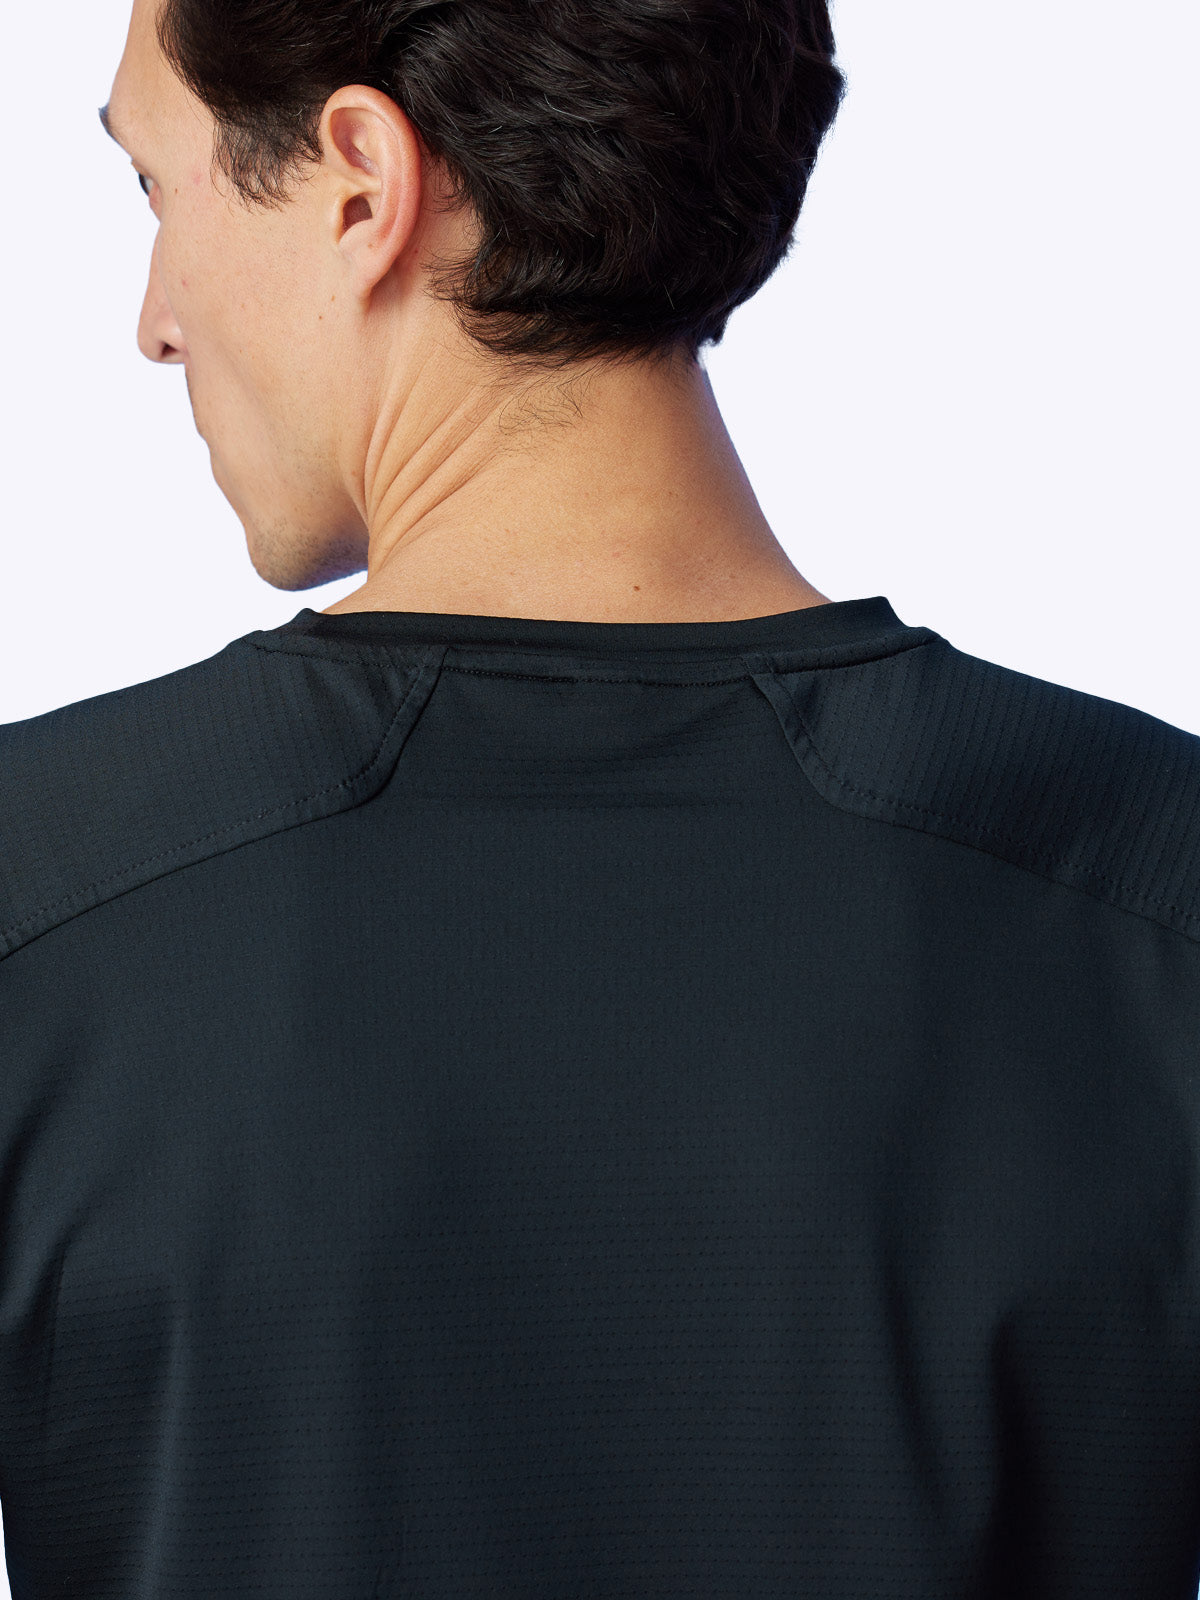 Rear shot of the Seamfinity Long Sleeve in Onyx, showcasing the garment's elegant design and performance quality||||Onyx